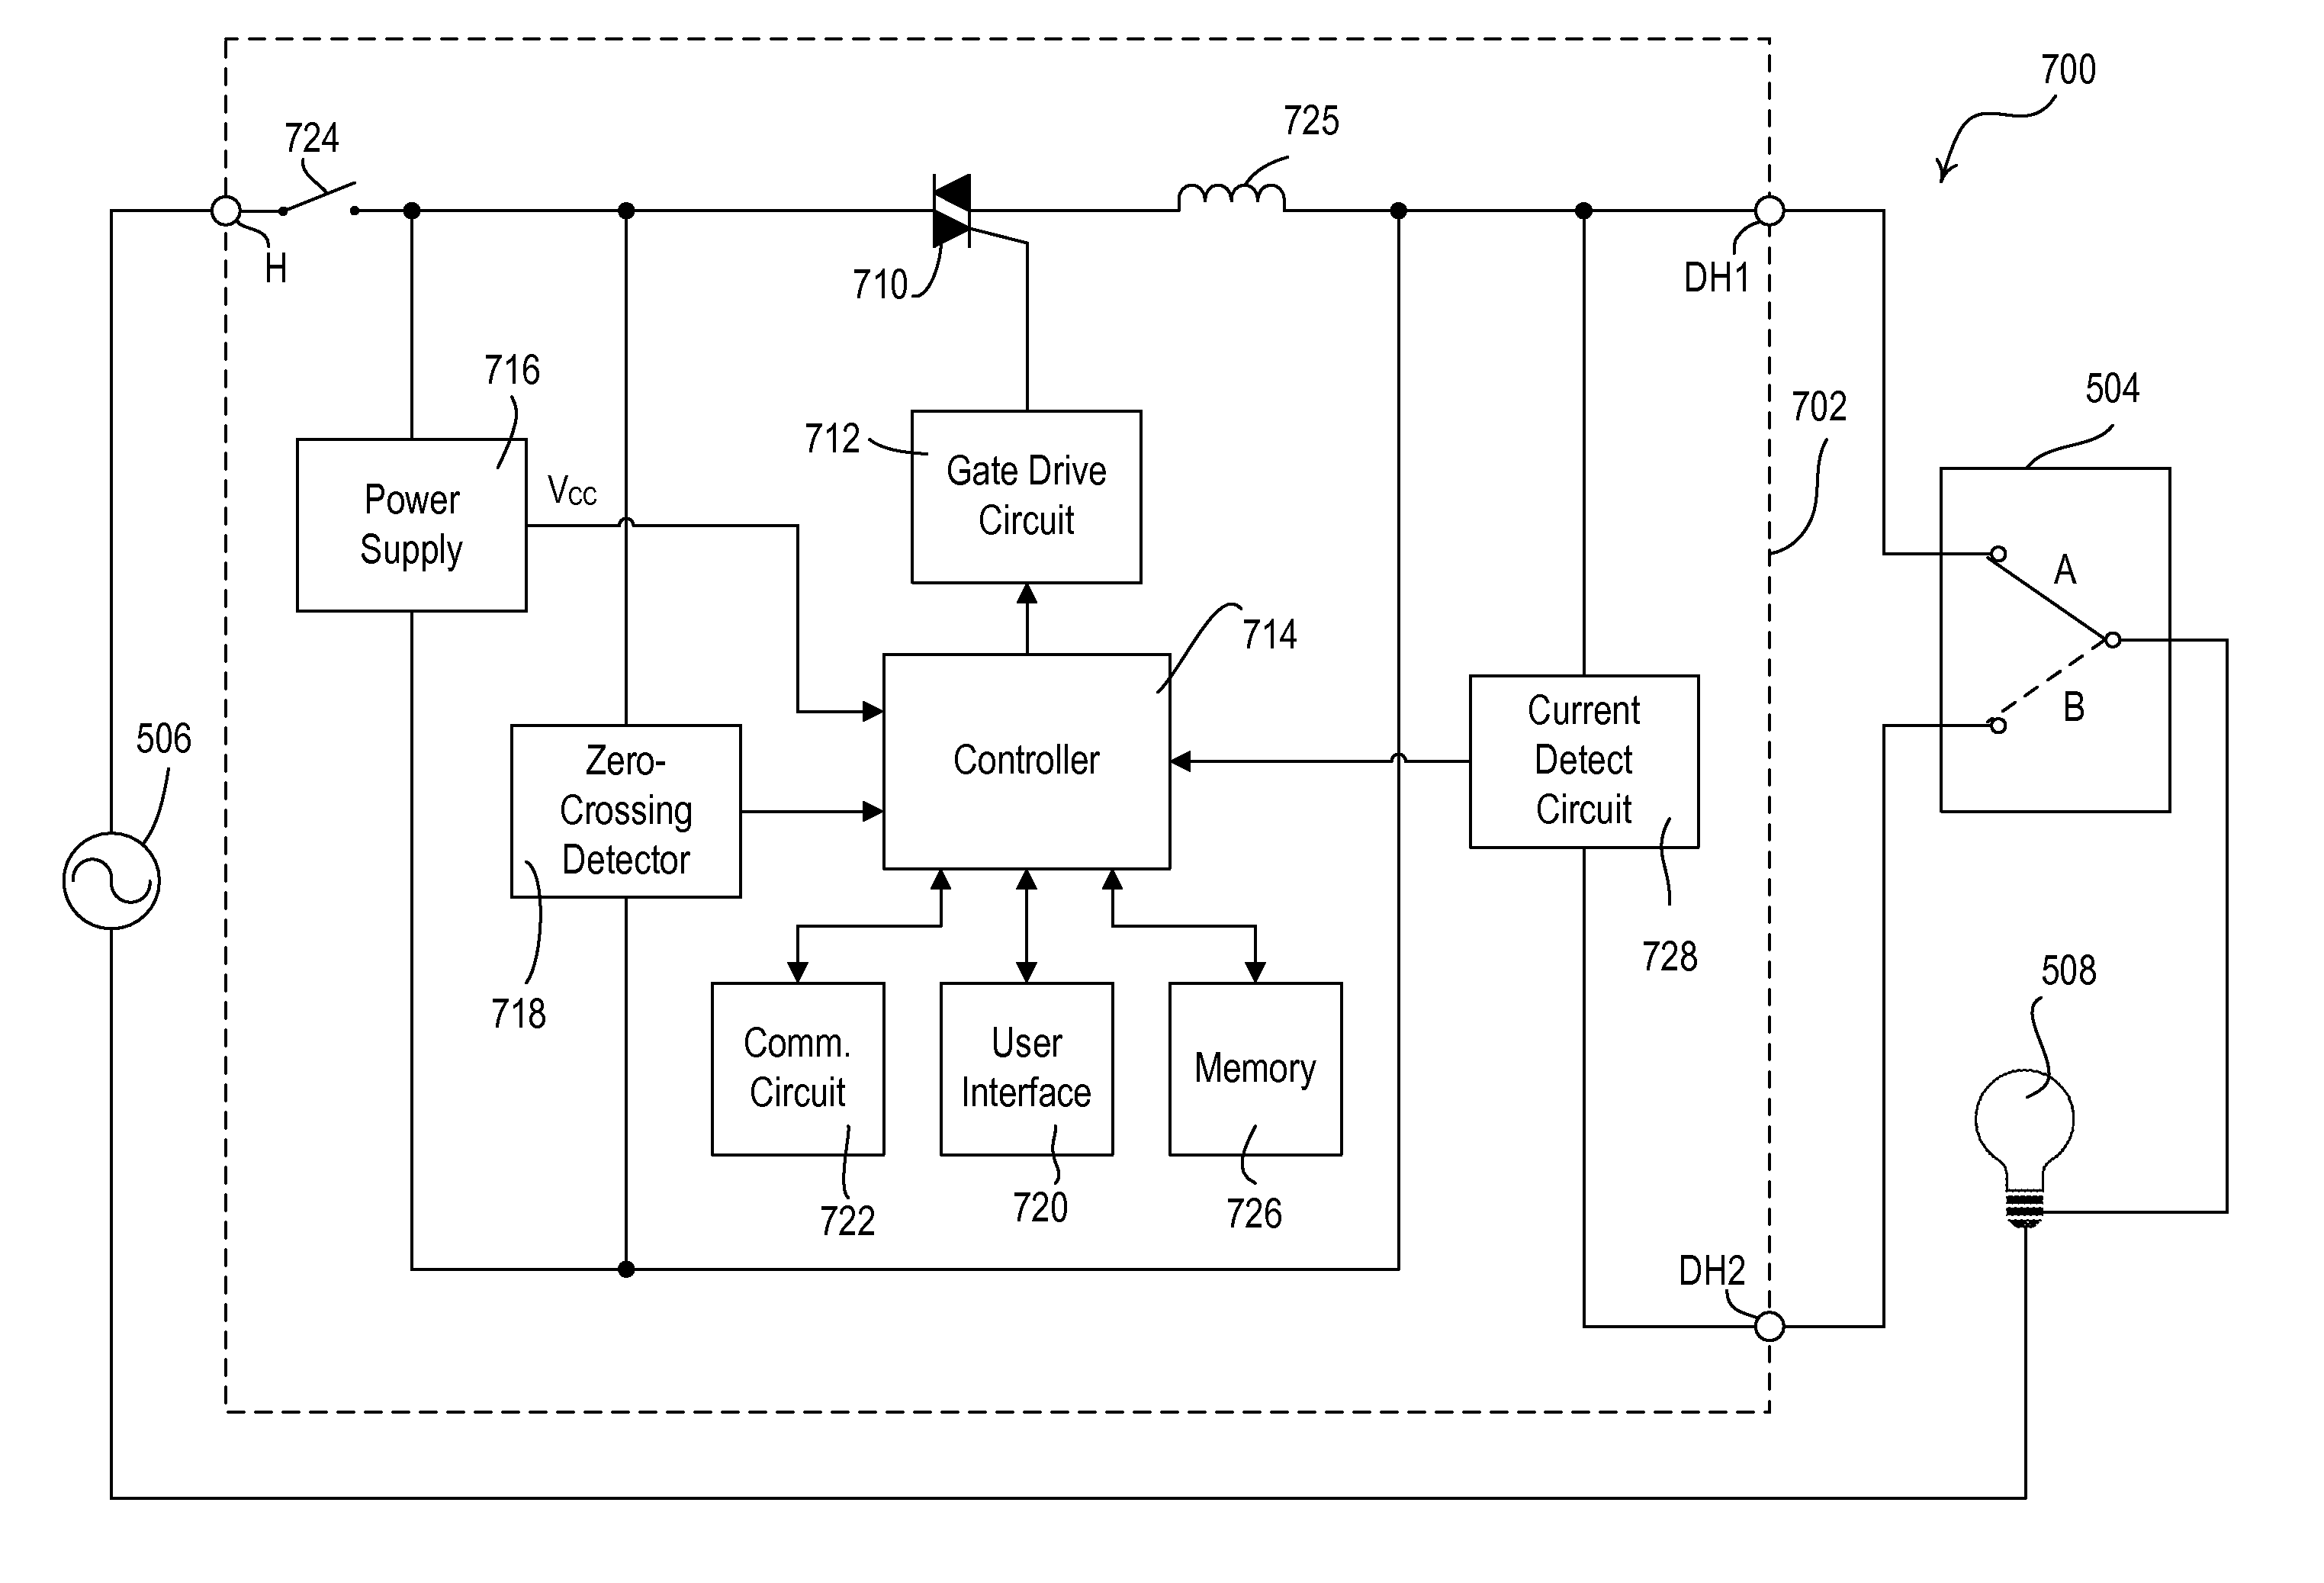 Load control device for use with lighting circuits having three-way switches